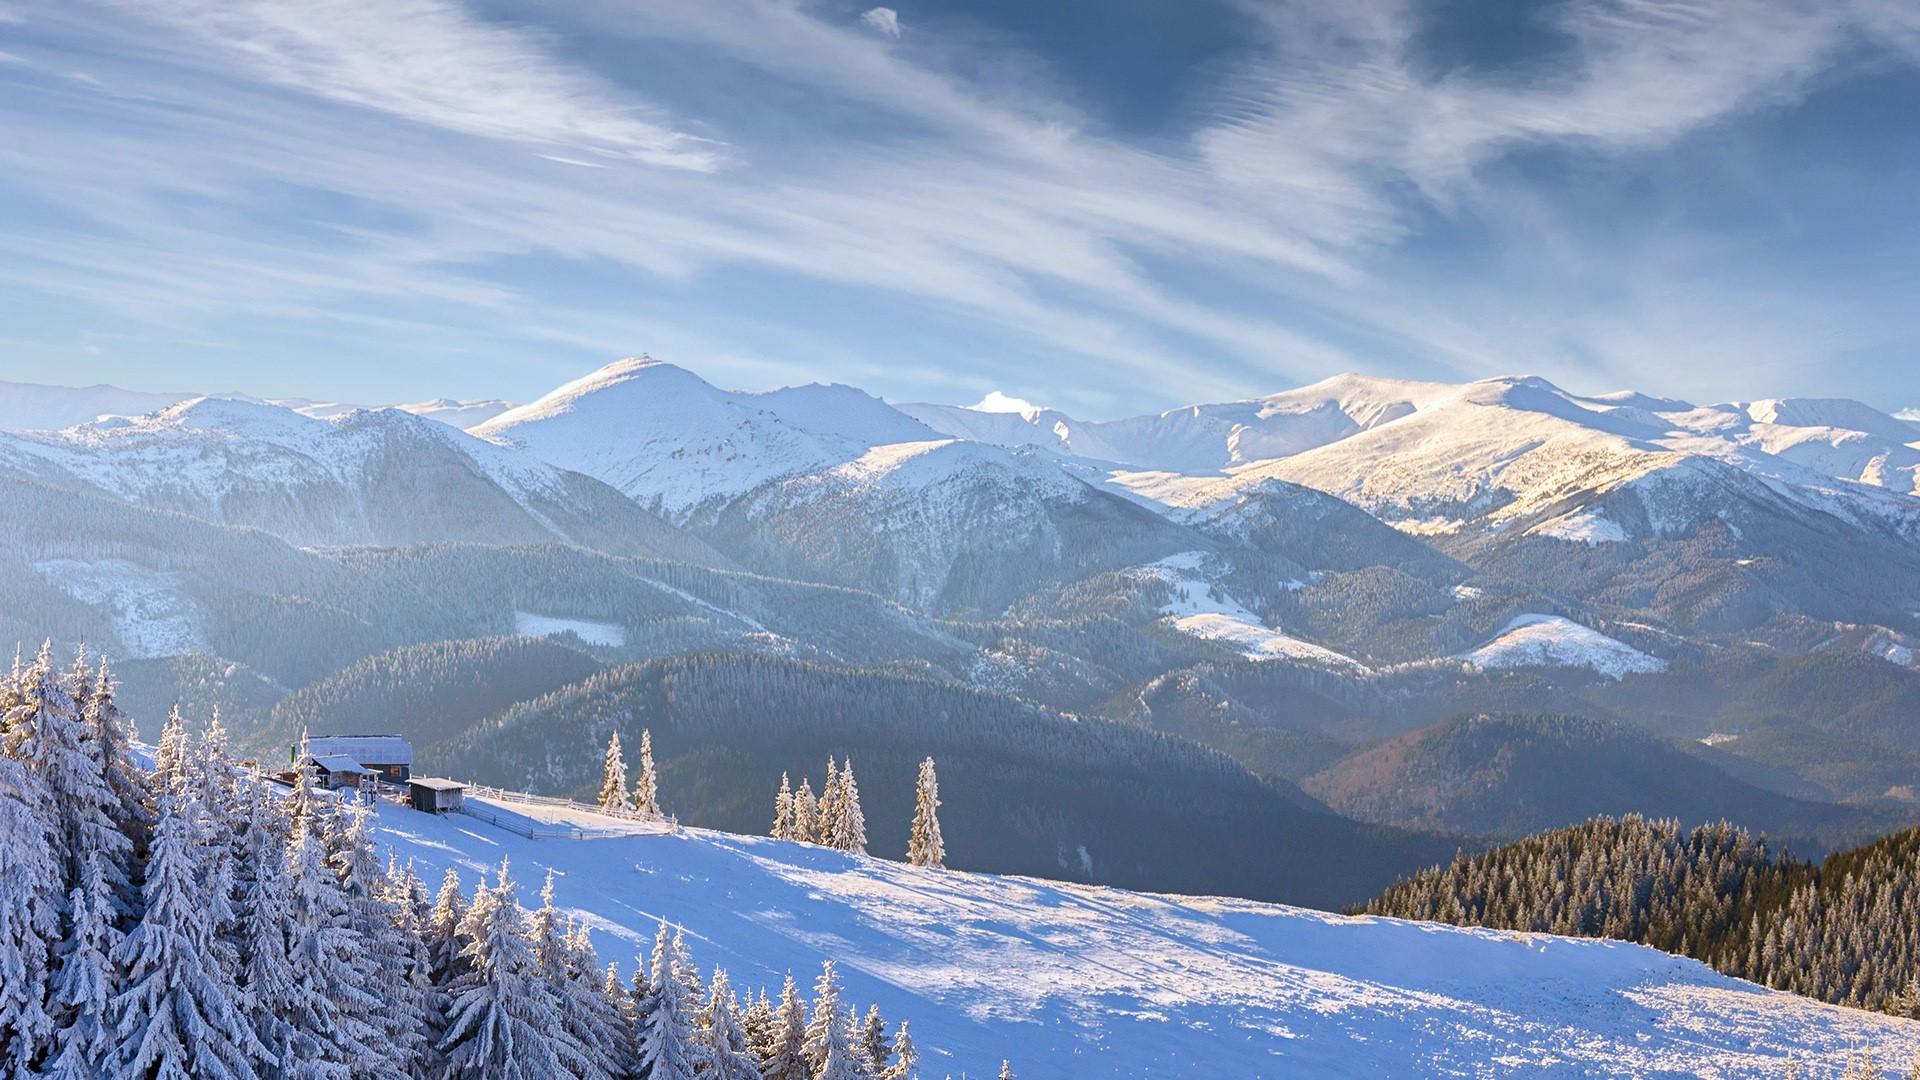 General 1920x1080 nature landscape mountains trees snow clouds sky sunlight morning house winter Caucasus Mountains Europe Georgia snowy mountain